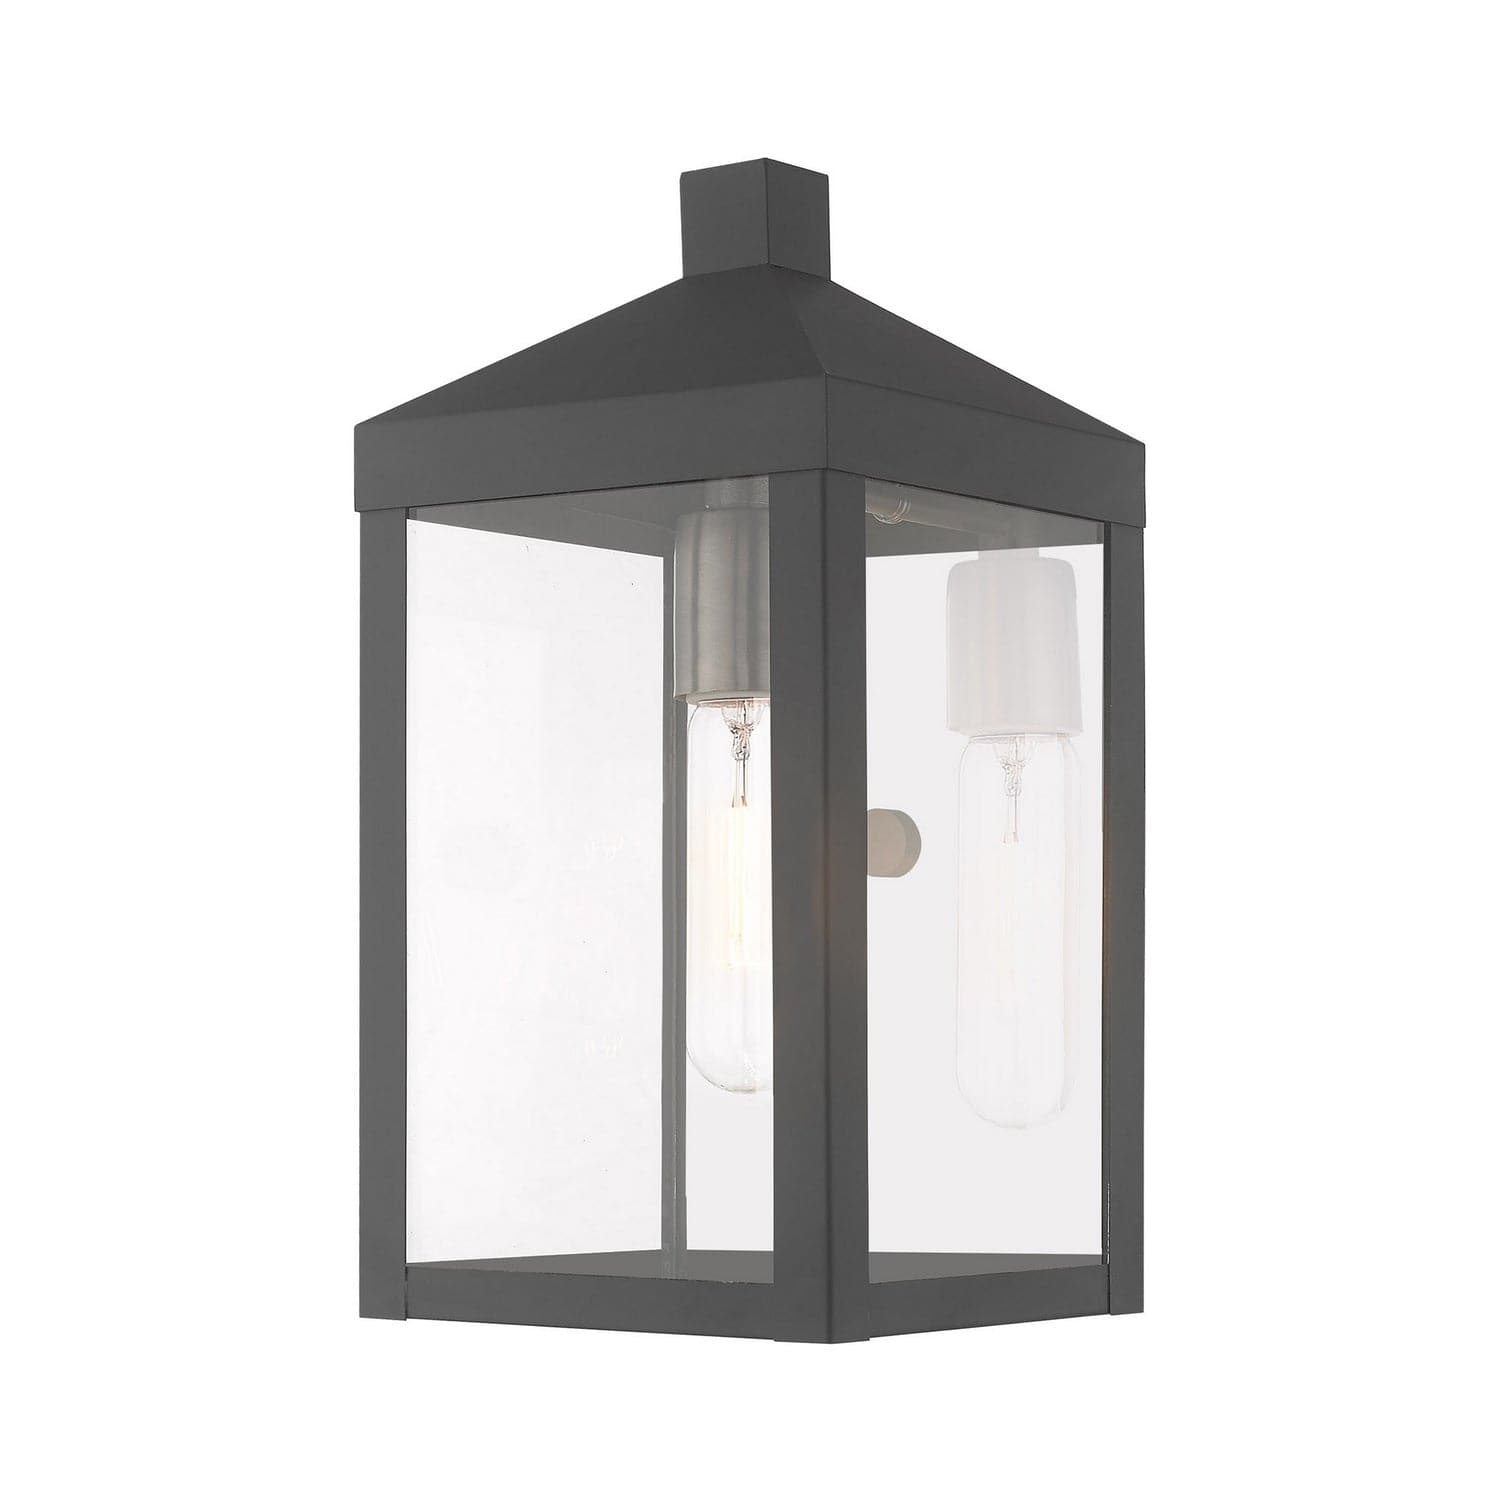 Livex Lighting - 20582-76 - One Light Outdoor Wall Lantern - Nyack - Scandinavian Gray w/ Brushed Nickels and Polished Chrome Stainless Steel